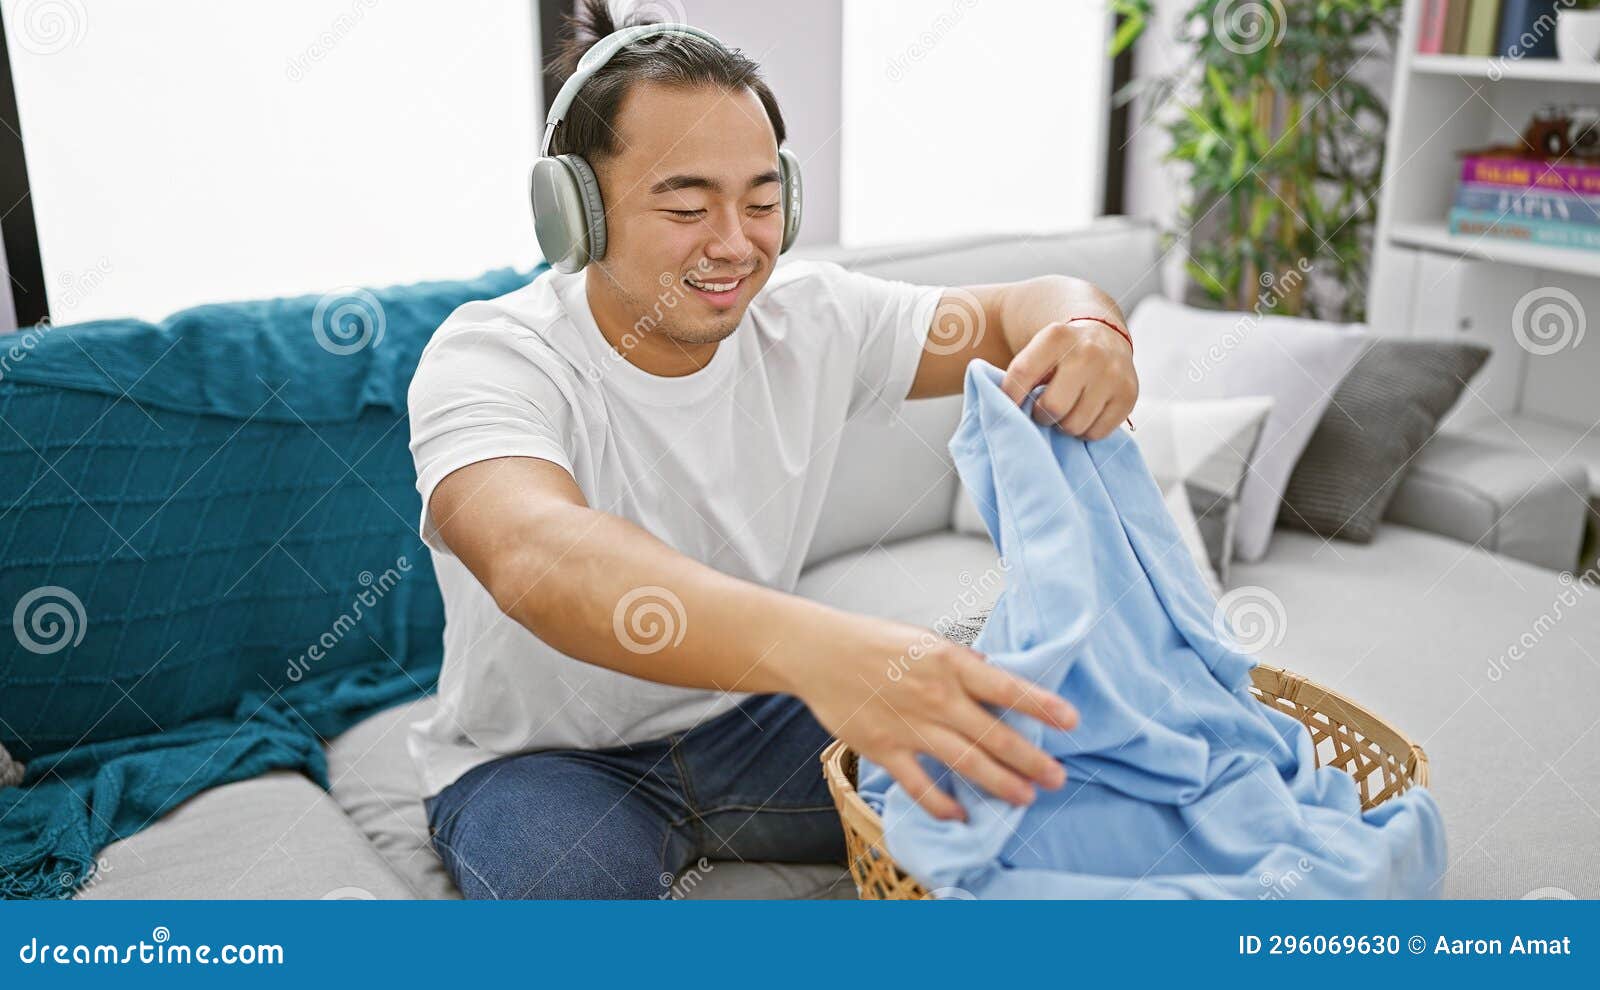 young chinese guy indulging in music while smilingly doing laundry chores at home